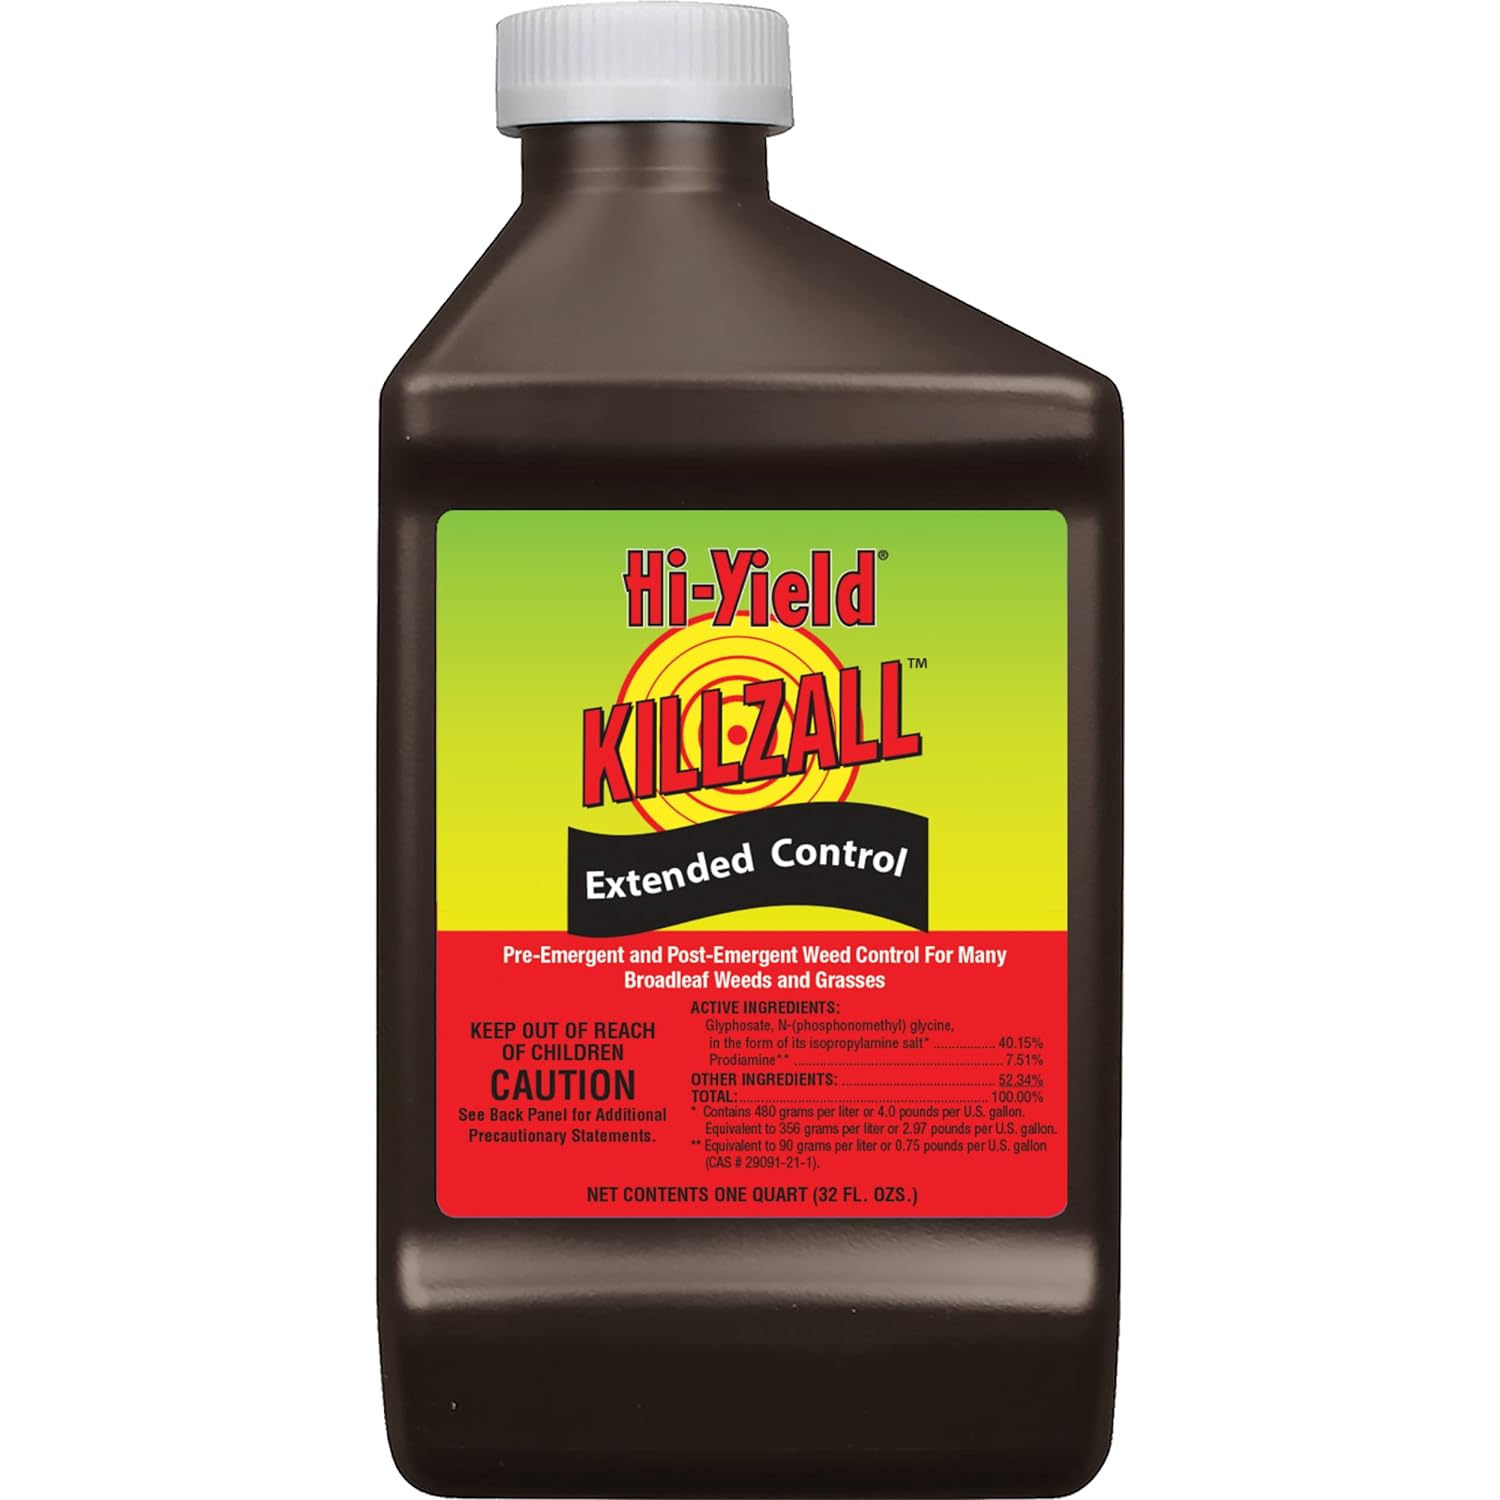 Hi-Yield Killzall Extended Weed Control for Broadhead Weeds and Grasses, 32 Oz